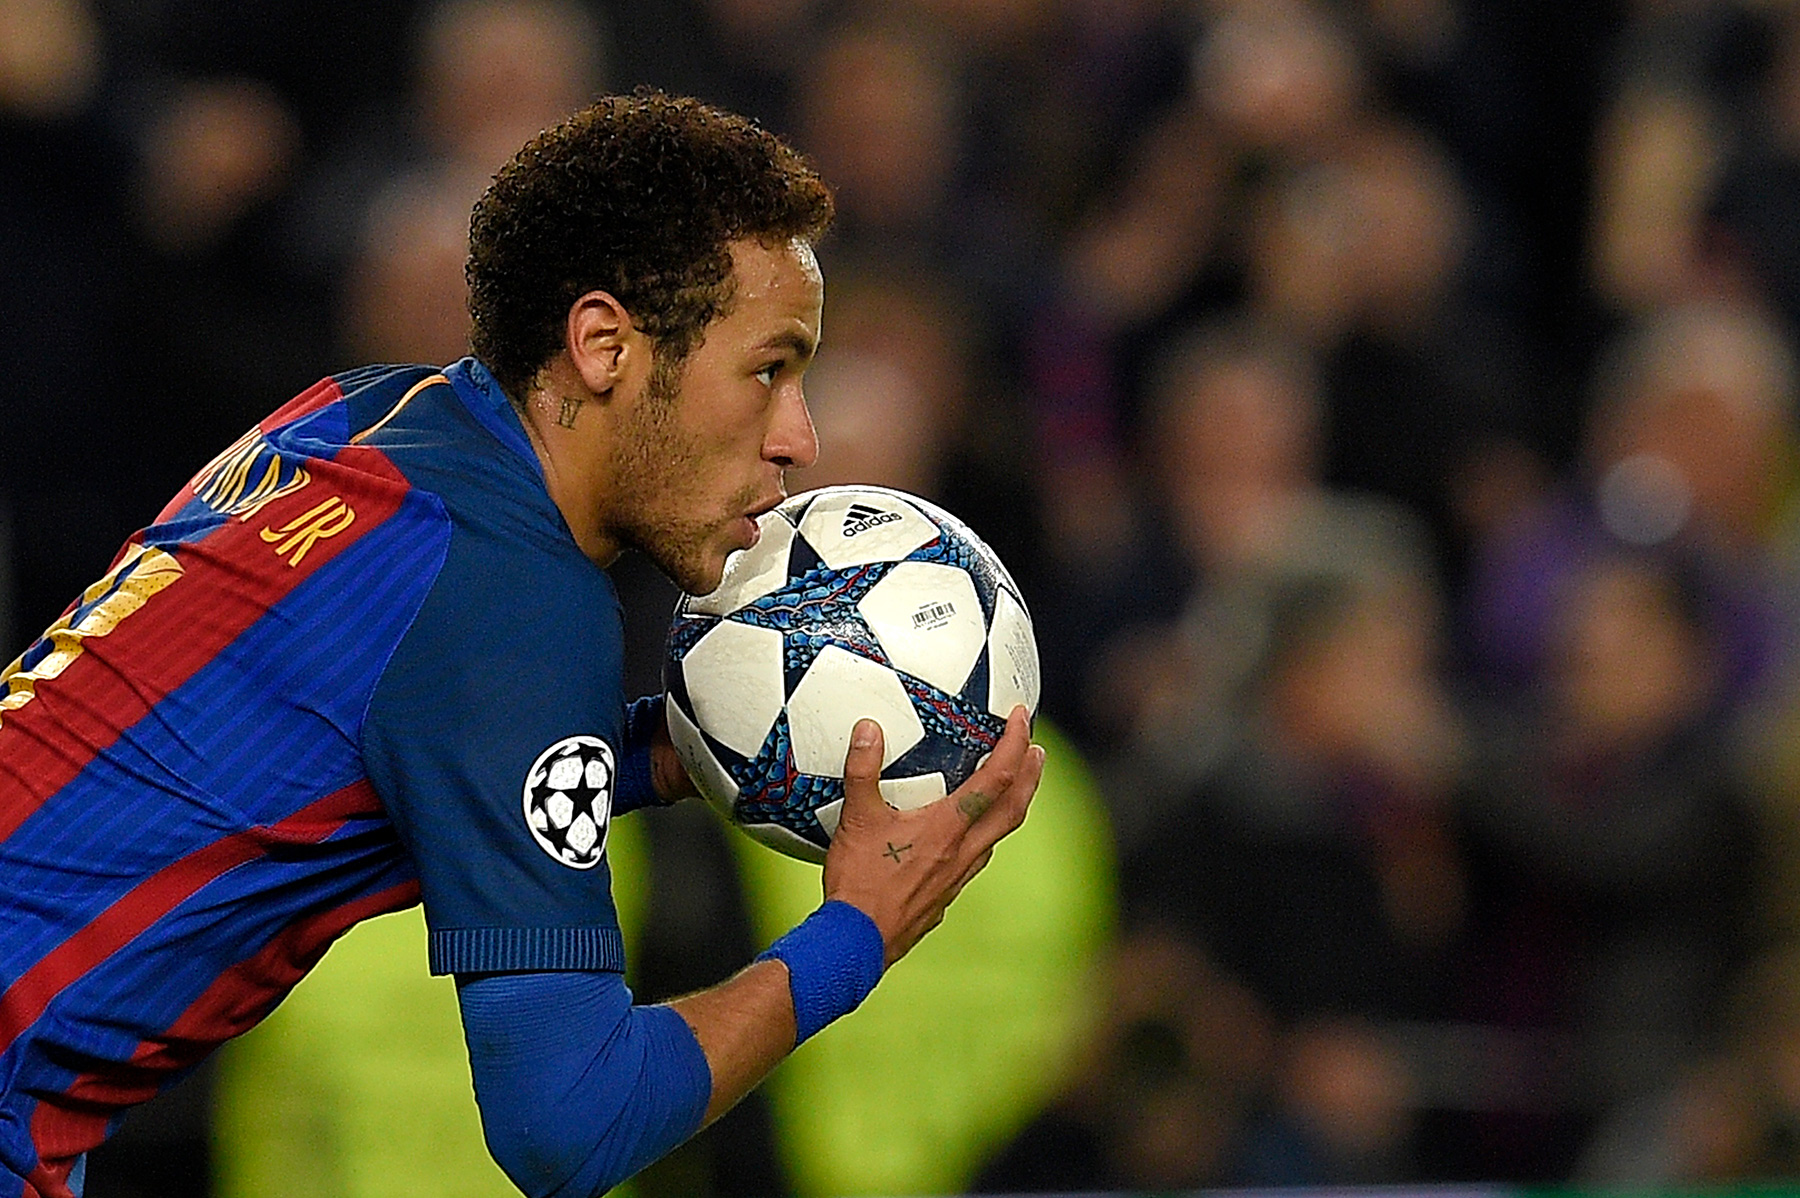 No Messi, no Ronaldo: Champions League stage set for Neymar to prove he's  still Ballon d'Or-worthy